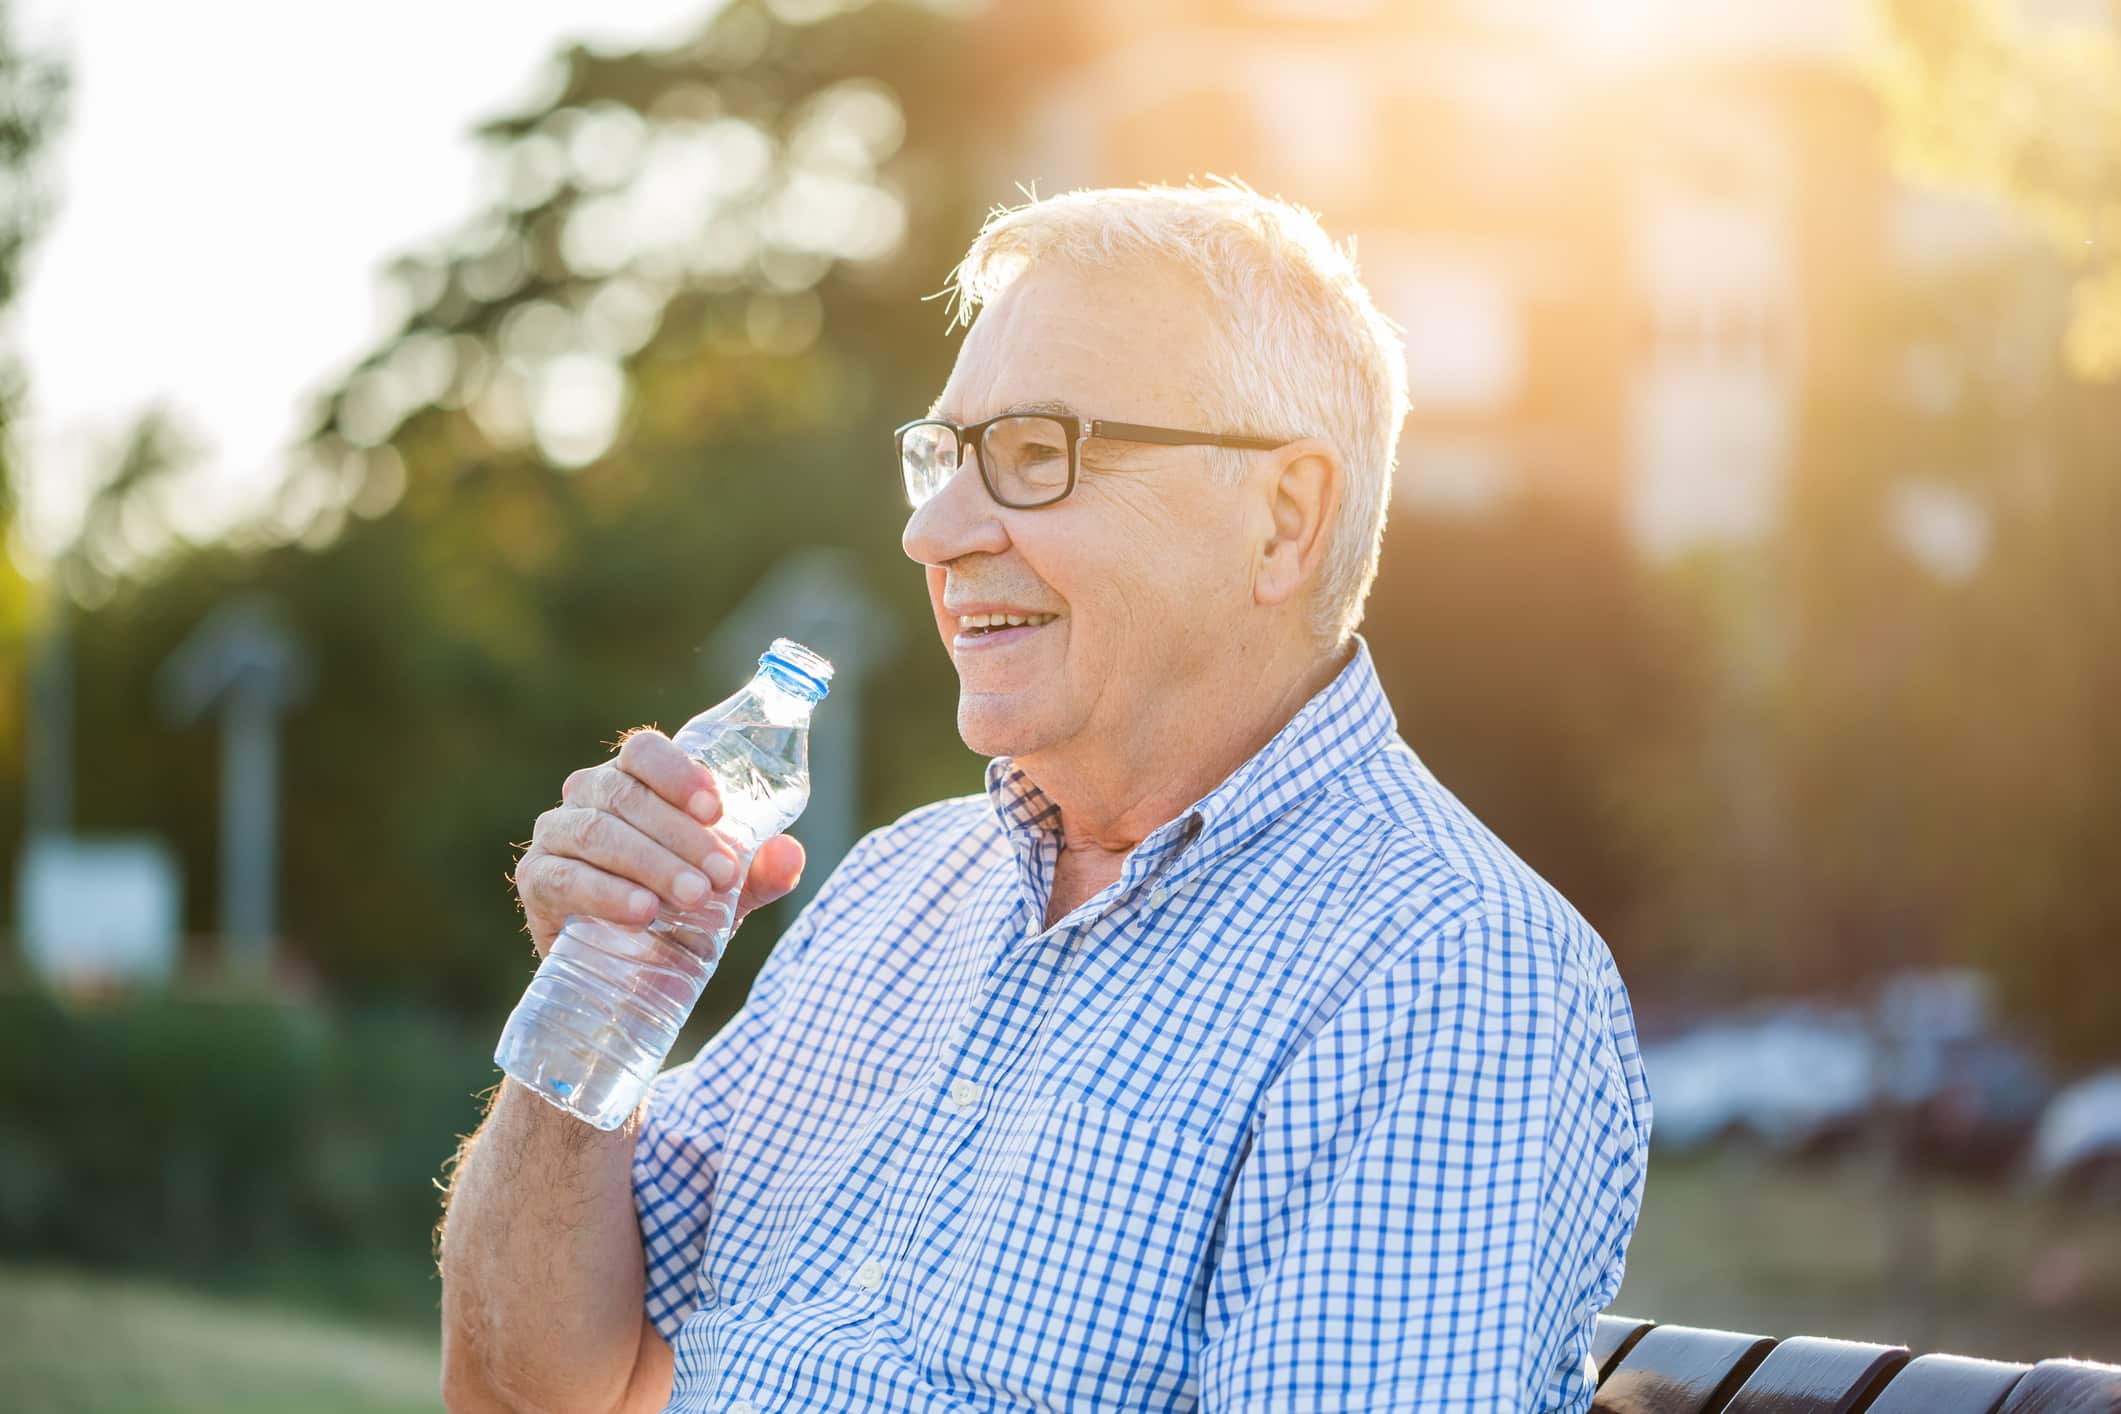 A happy older man drinking from a bottle of water after learning about the importance of hydration for seniors.